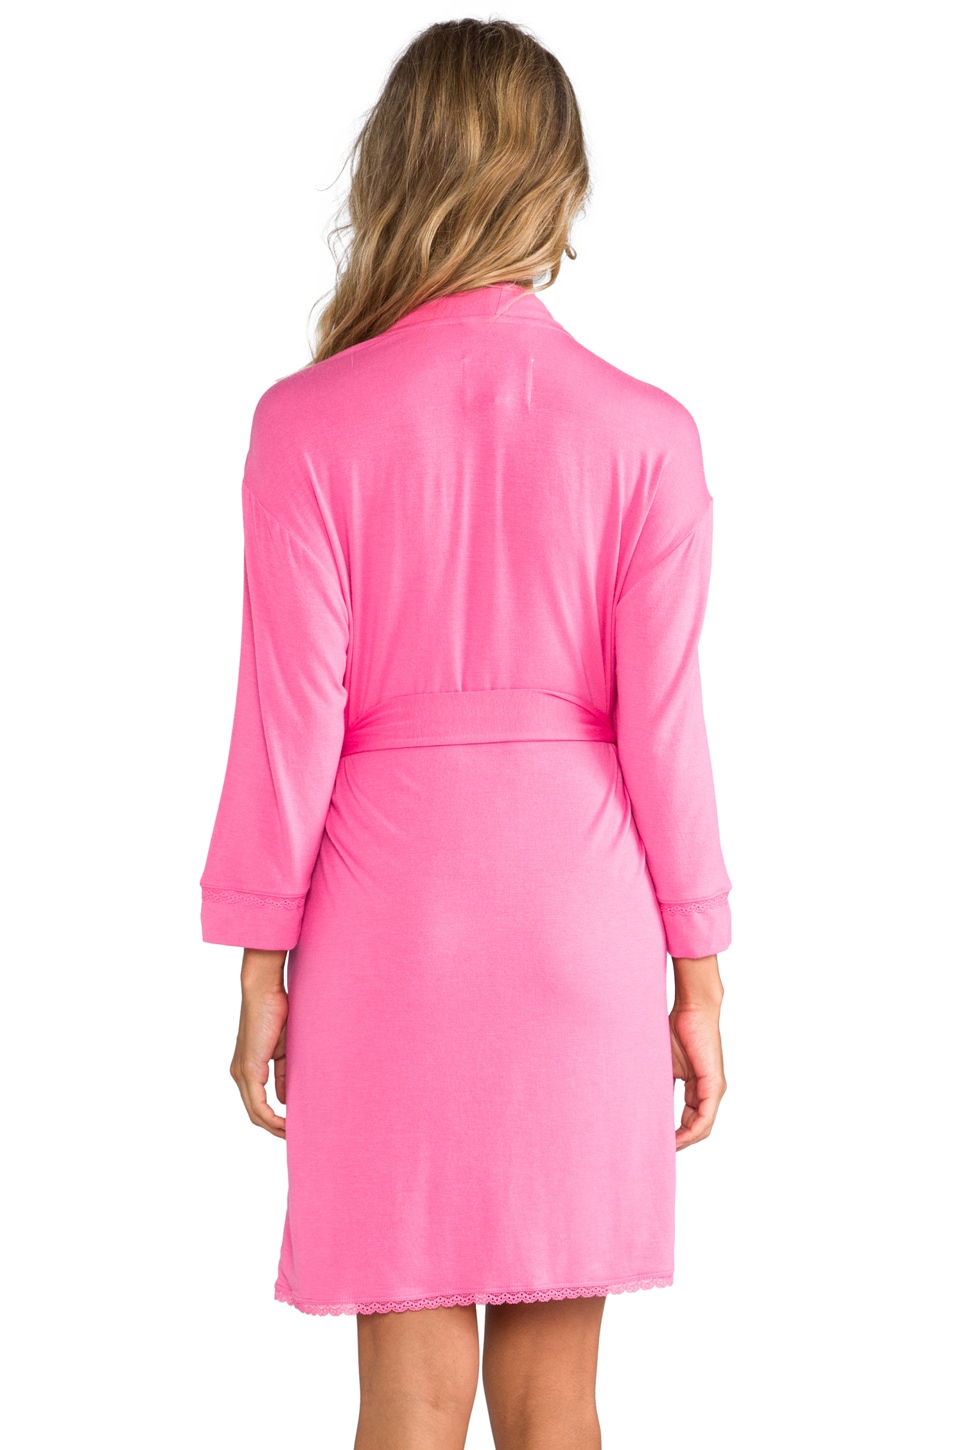 Juicy Couture Robe in Light Helium Pink | REVOLVE